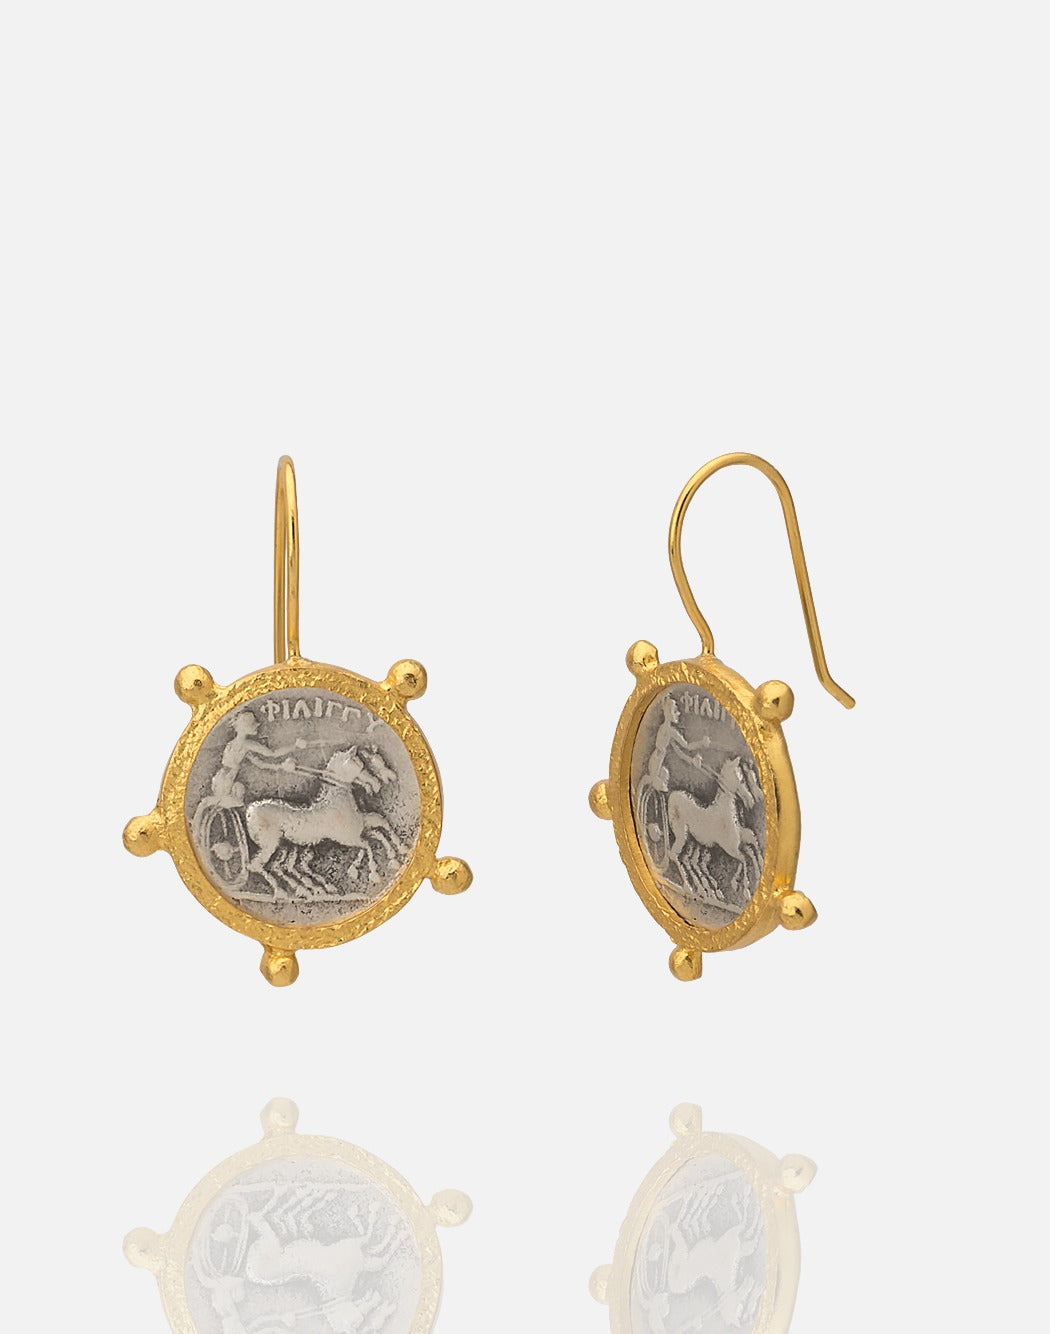 Two-tone gold and rhodium Roman coin with chariot earring